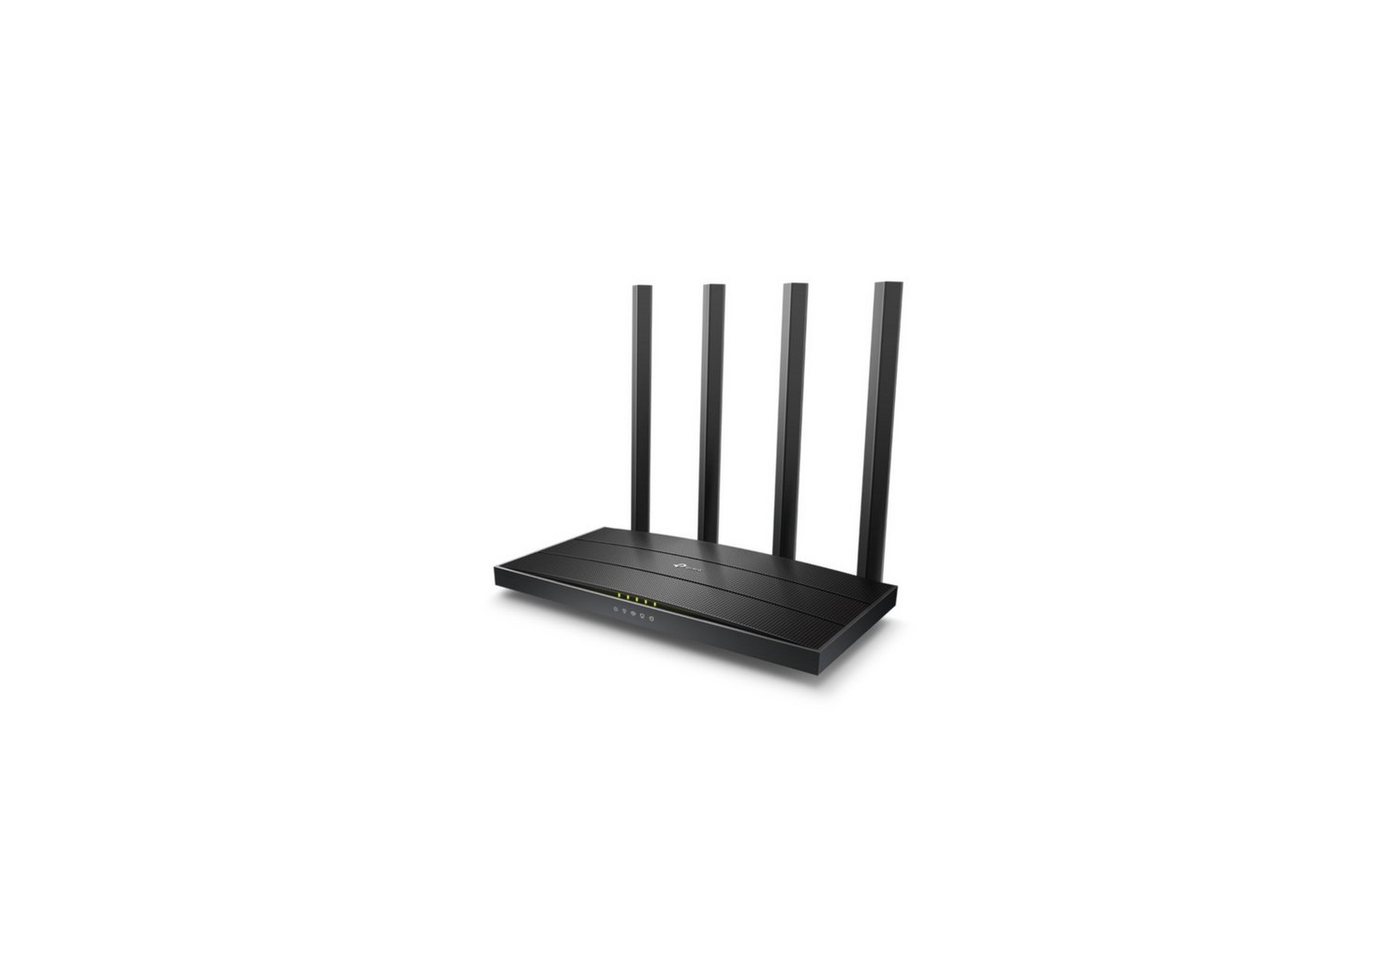 tp-link AC1900 MU-MIMO WLAN-Router WLAN-Router von tp-link